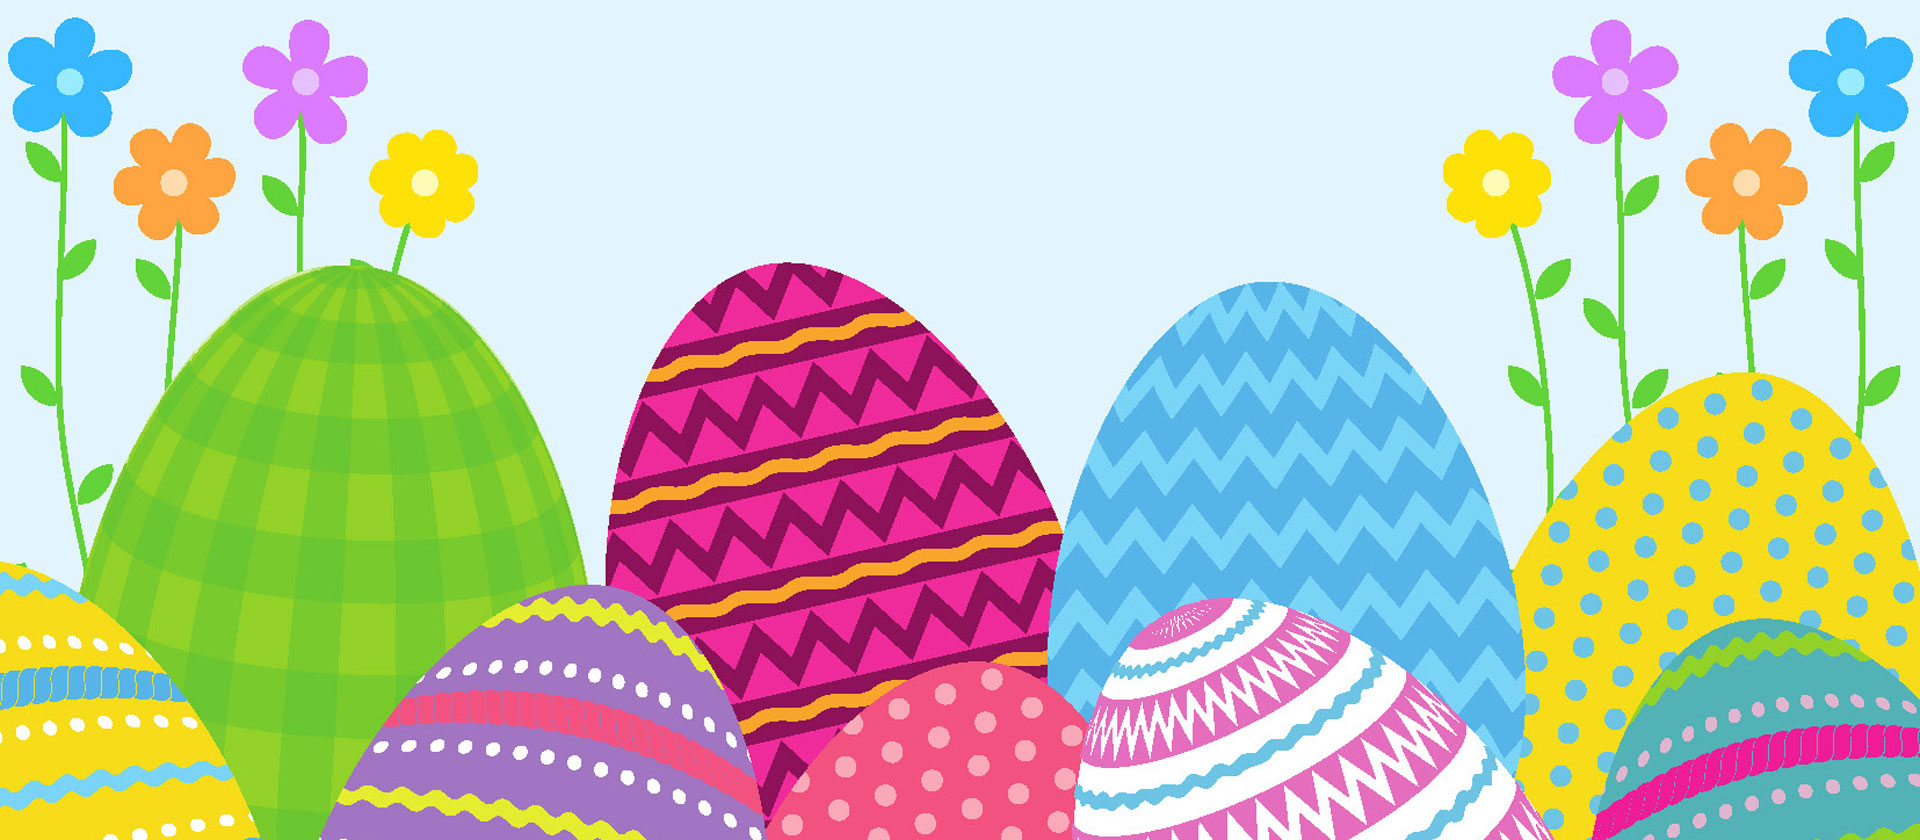 An illustration showing colourful decorated Easter Eggs